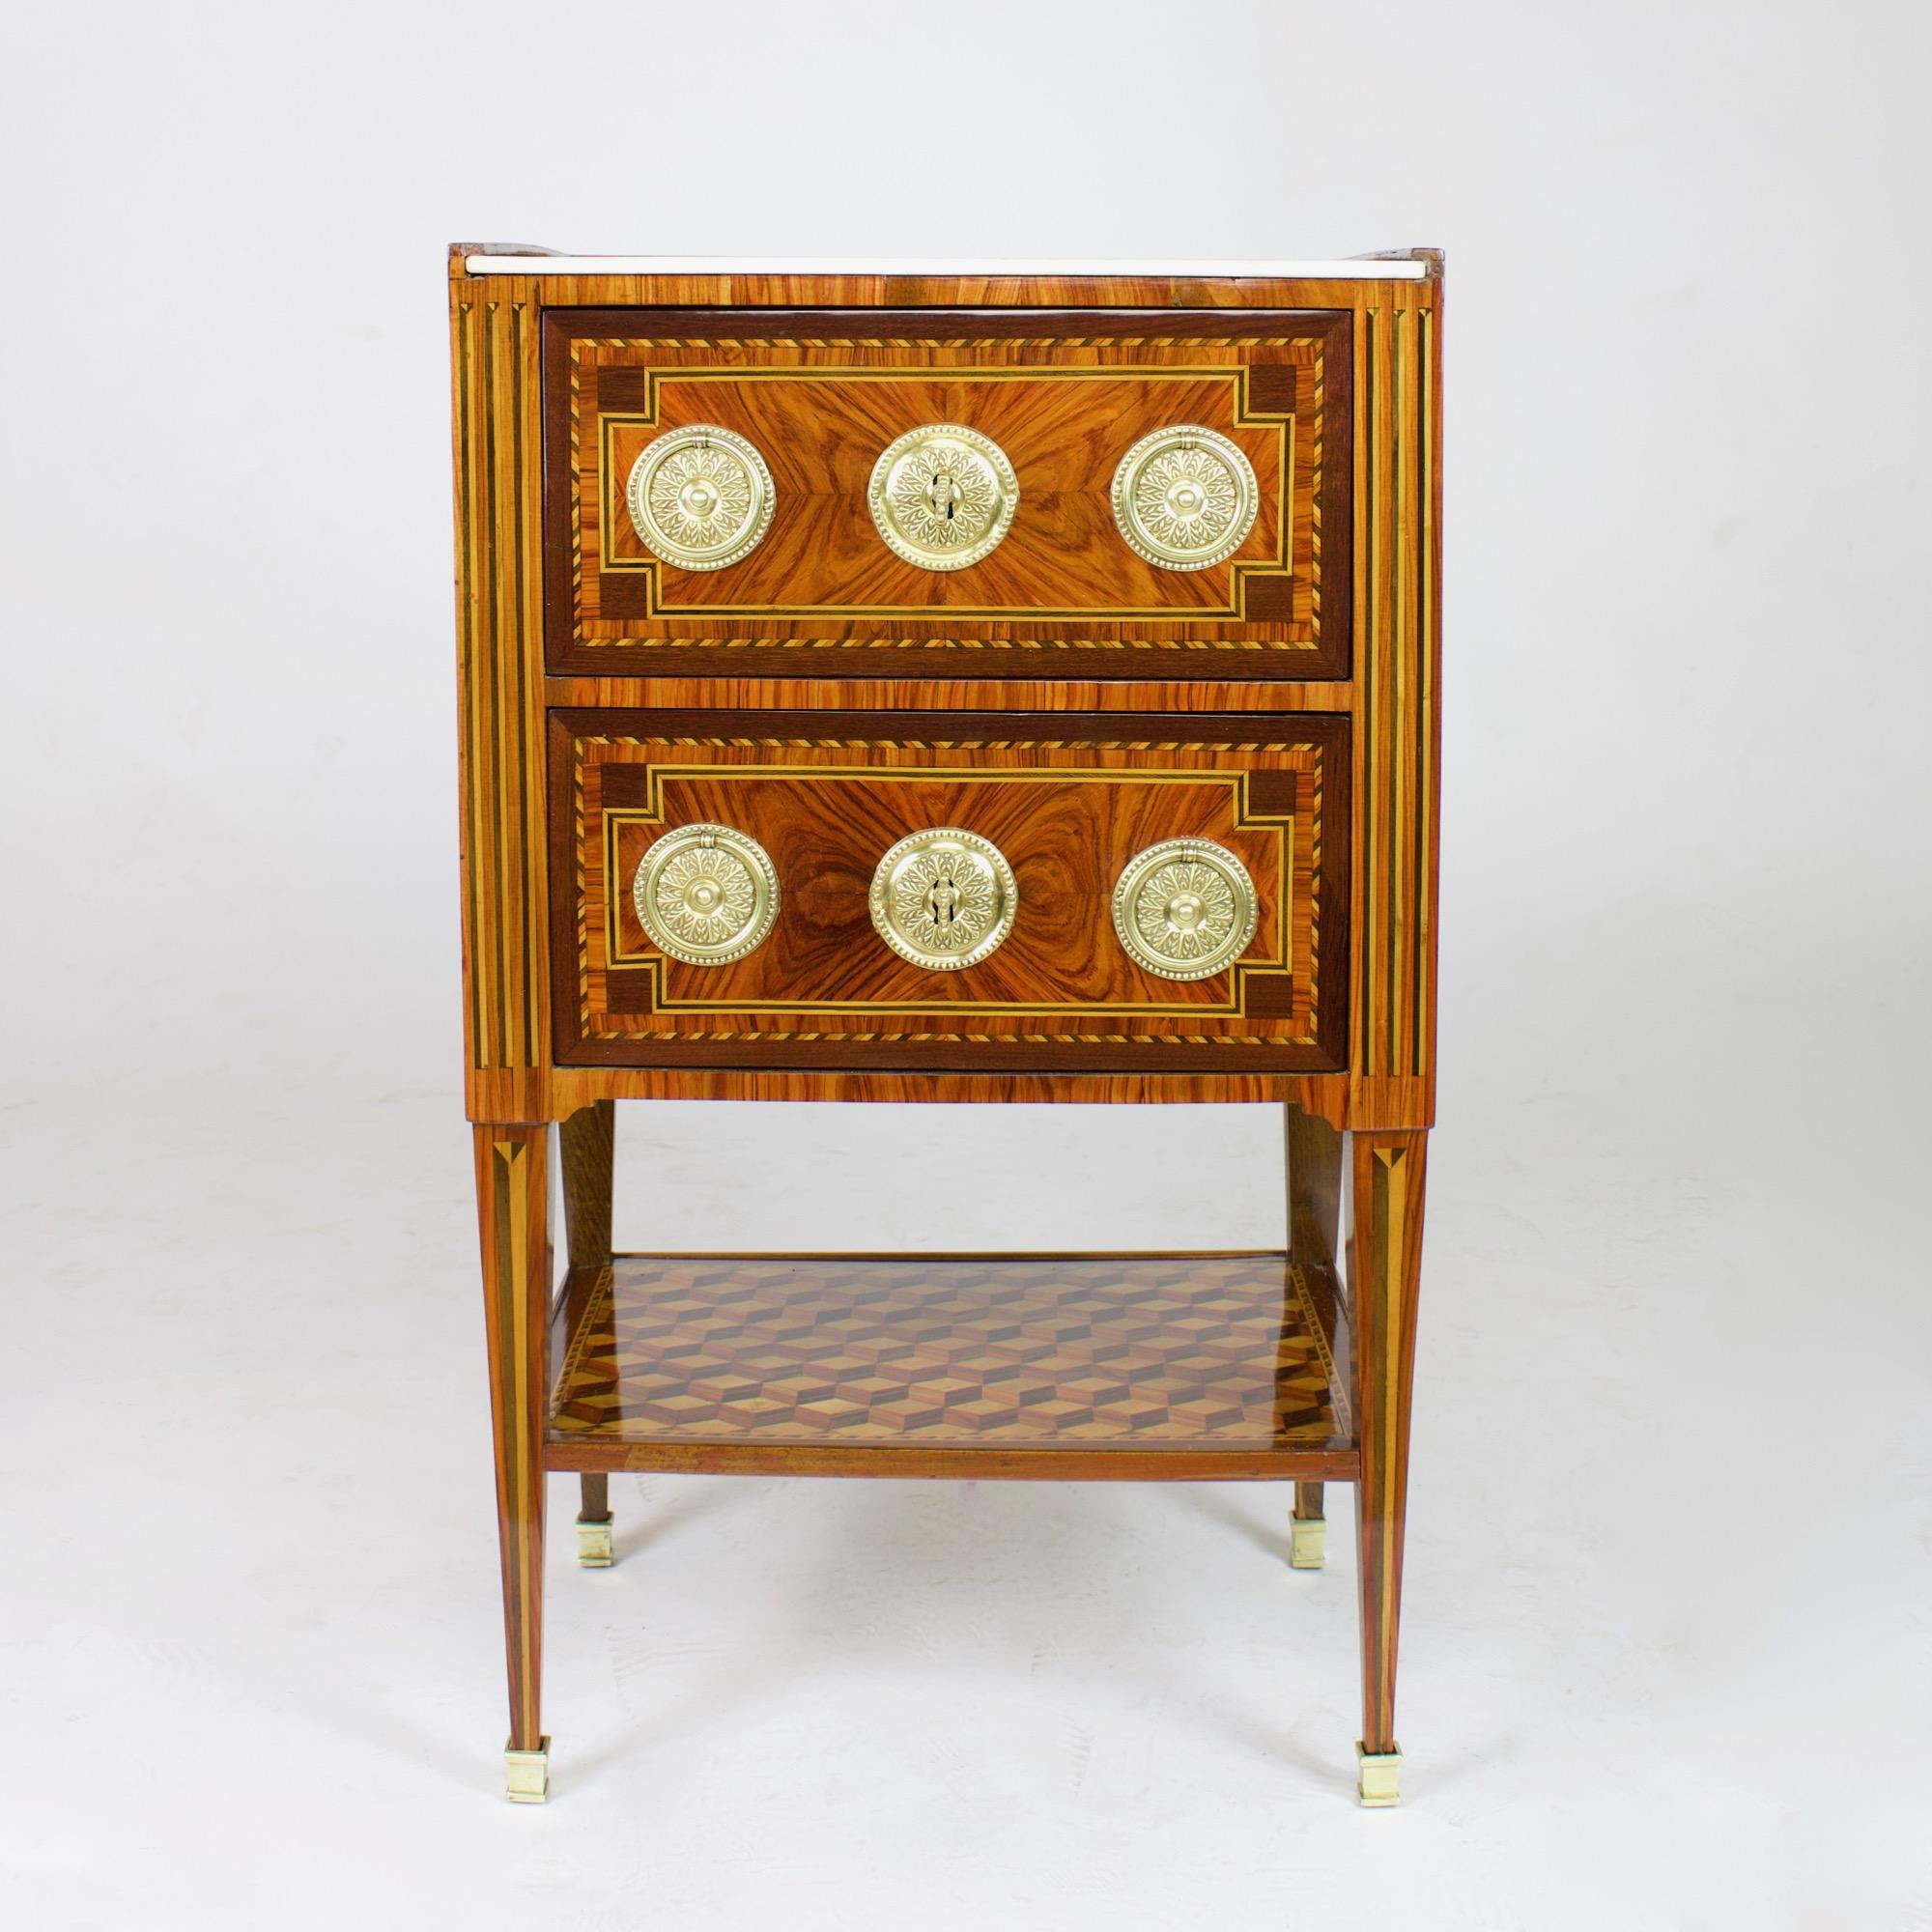 Excellent small Louis XVI period table, so-called “table chiffoniere”, made ca. 1775 in Eastern France, probably Strasburg: 

A rectangular side table standing on square tapering feet with trompe l’oeil fluting marquetry and gilt bronze sabots